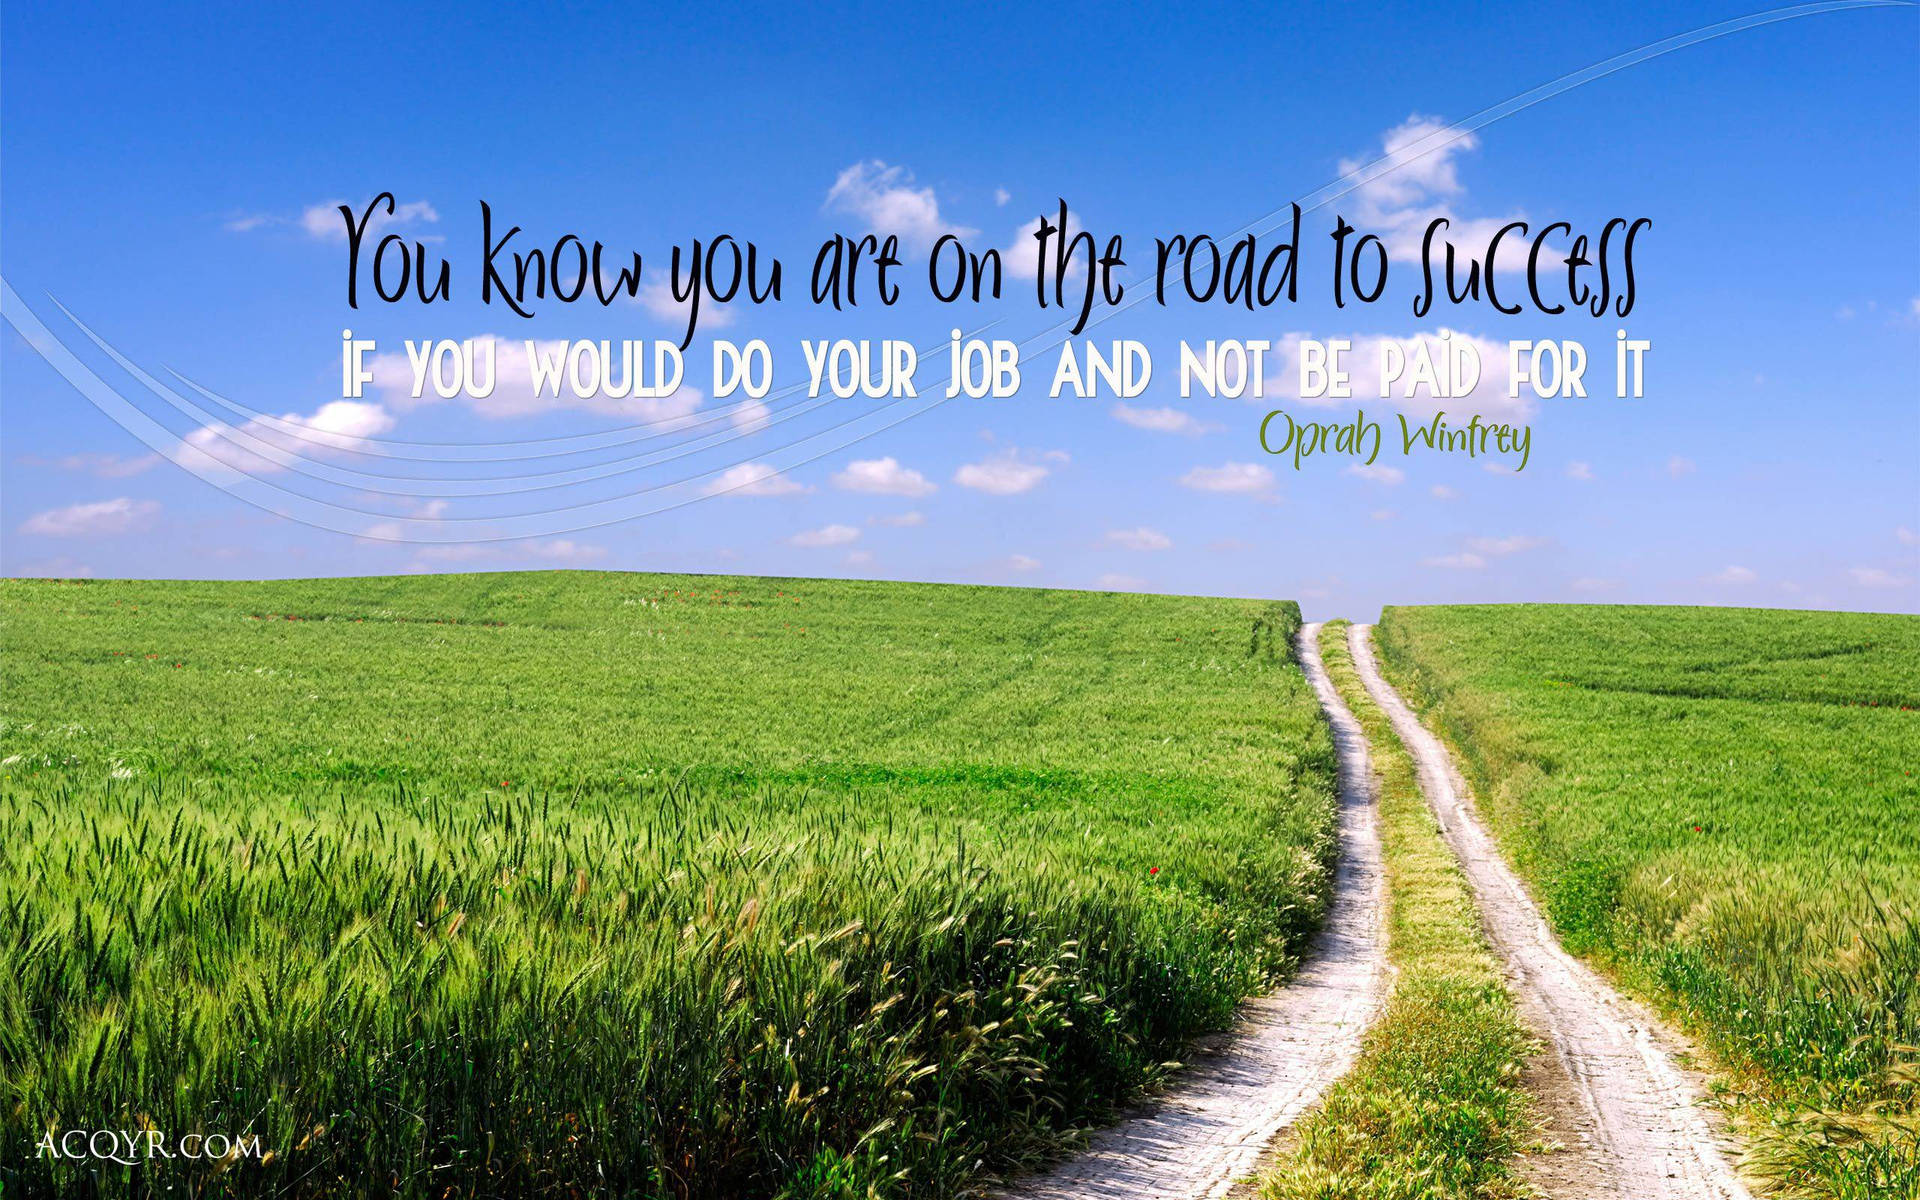 "Road to Success - Your Daily Motivational Journey" Wallpaper